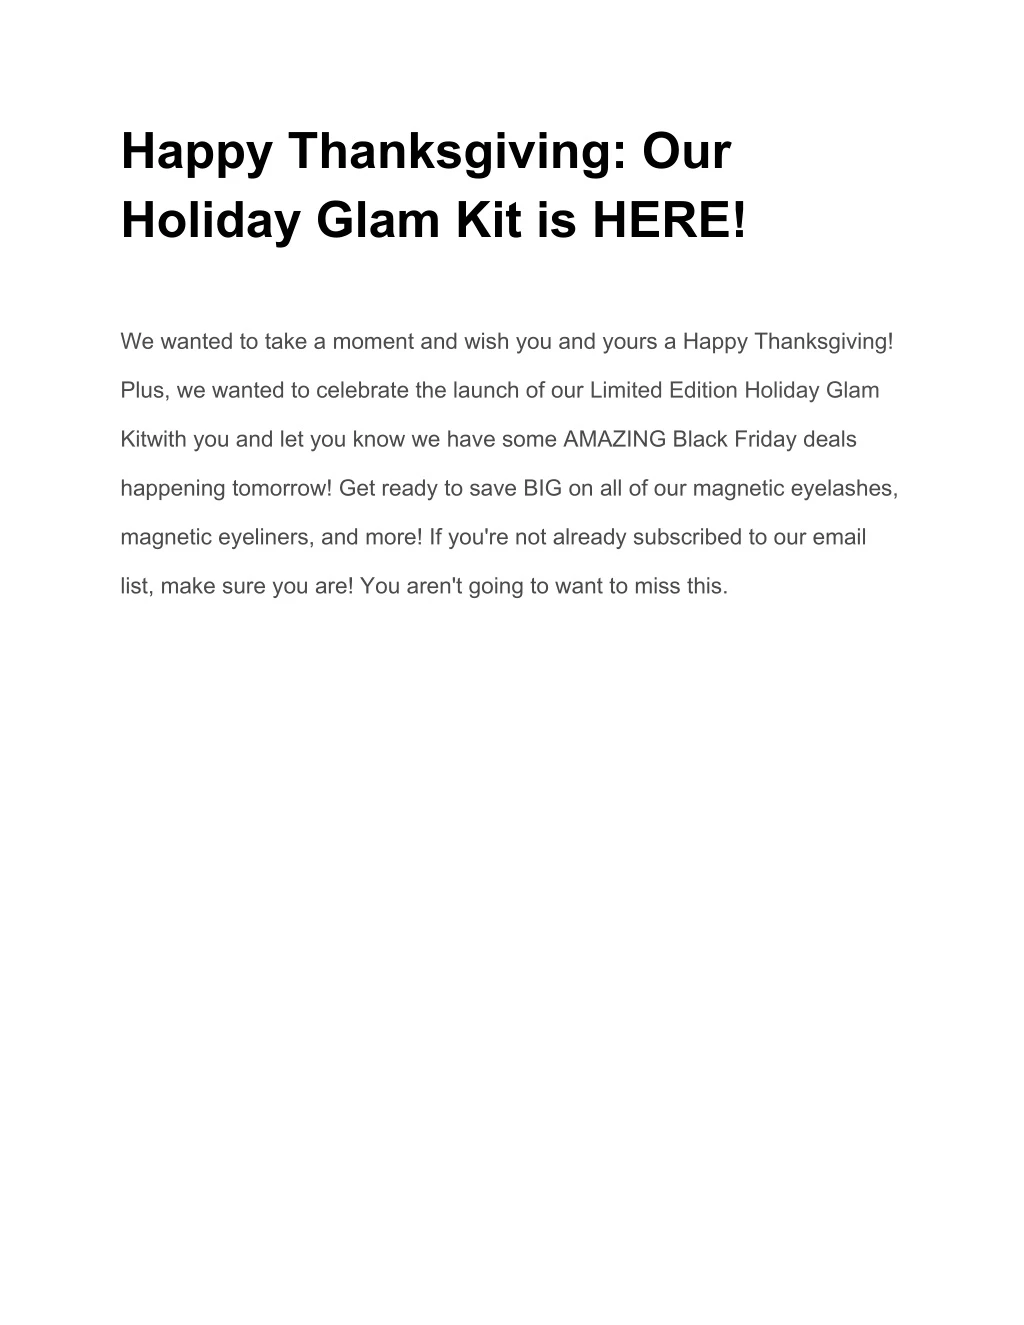 happy thanksgiving our holiday glam kit is here